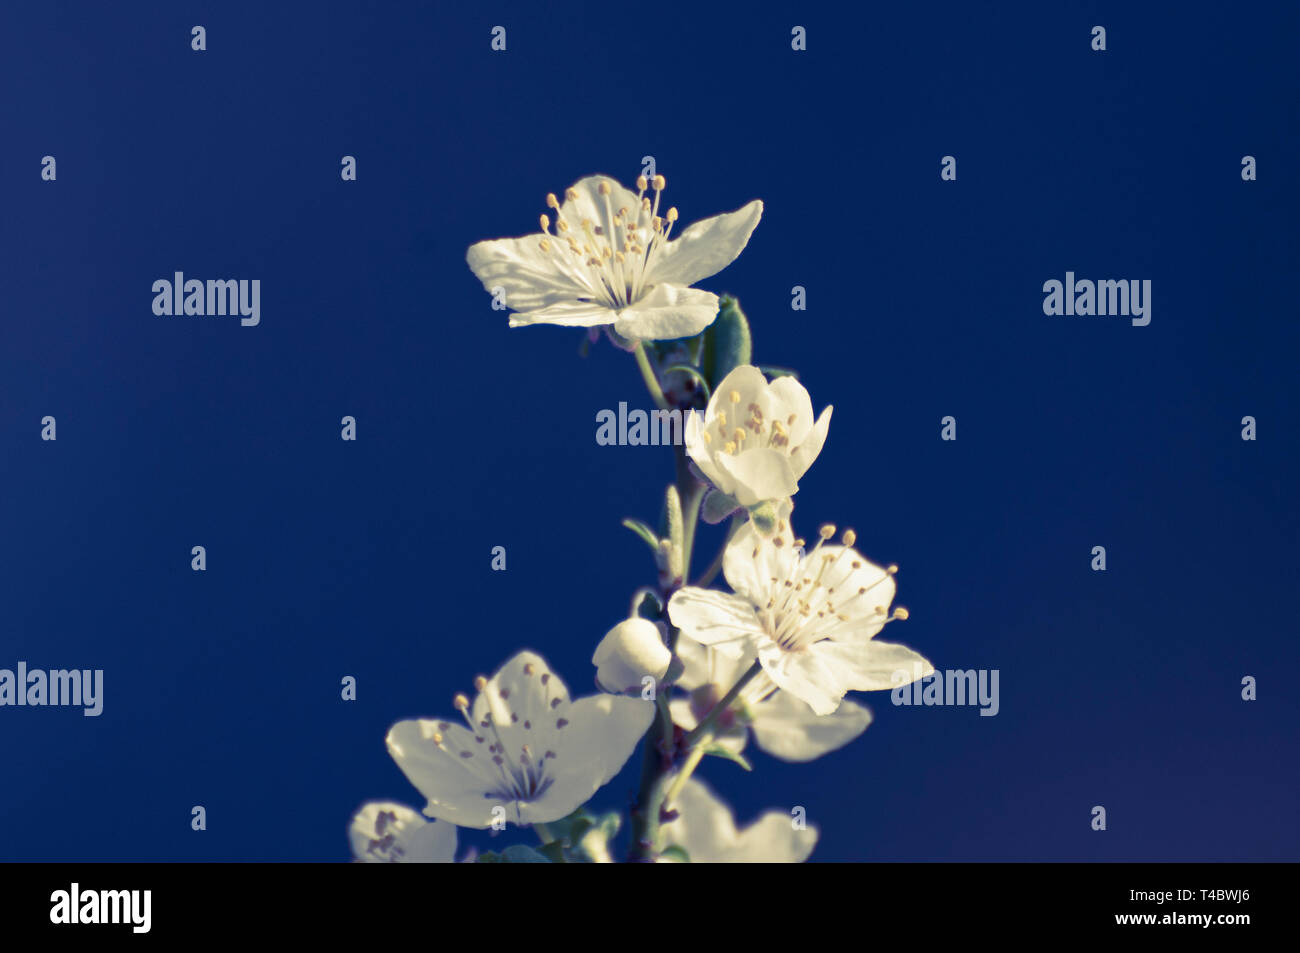 white apple tree flowers in blossom Stock Photo